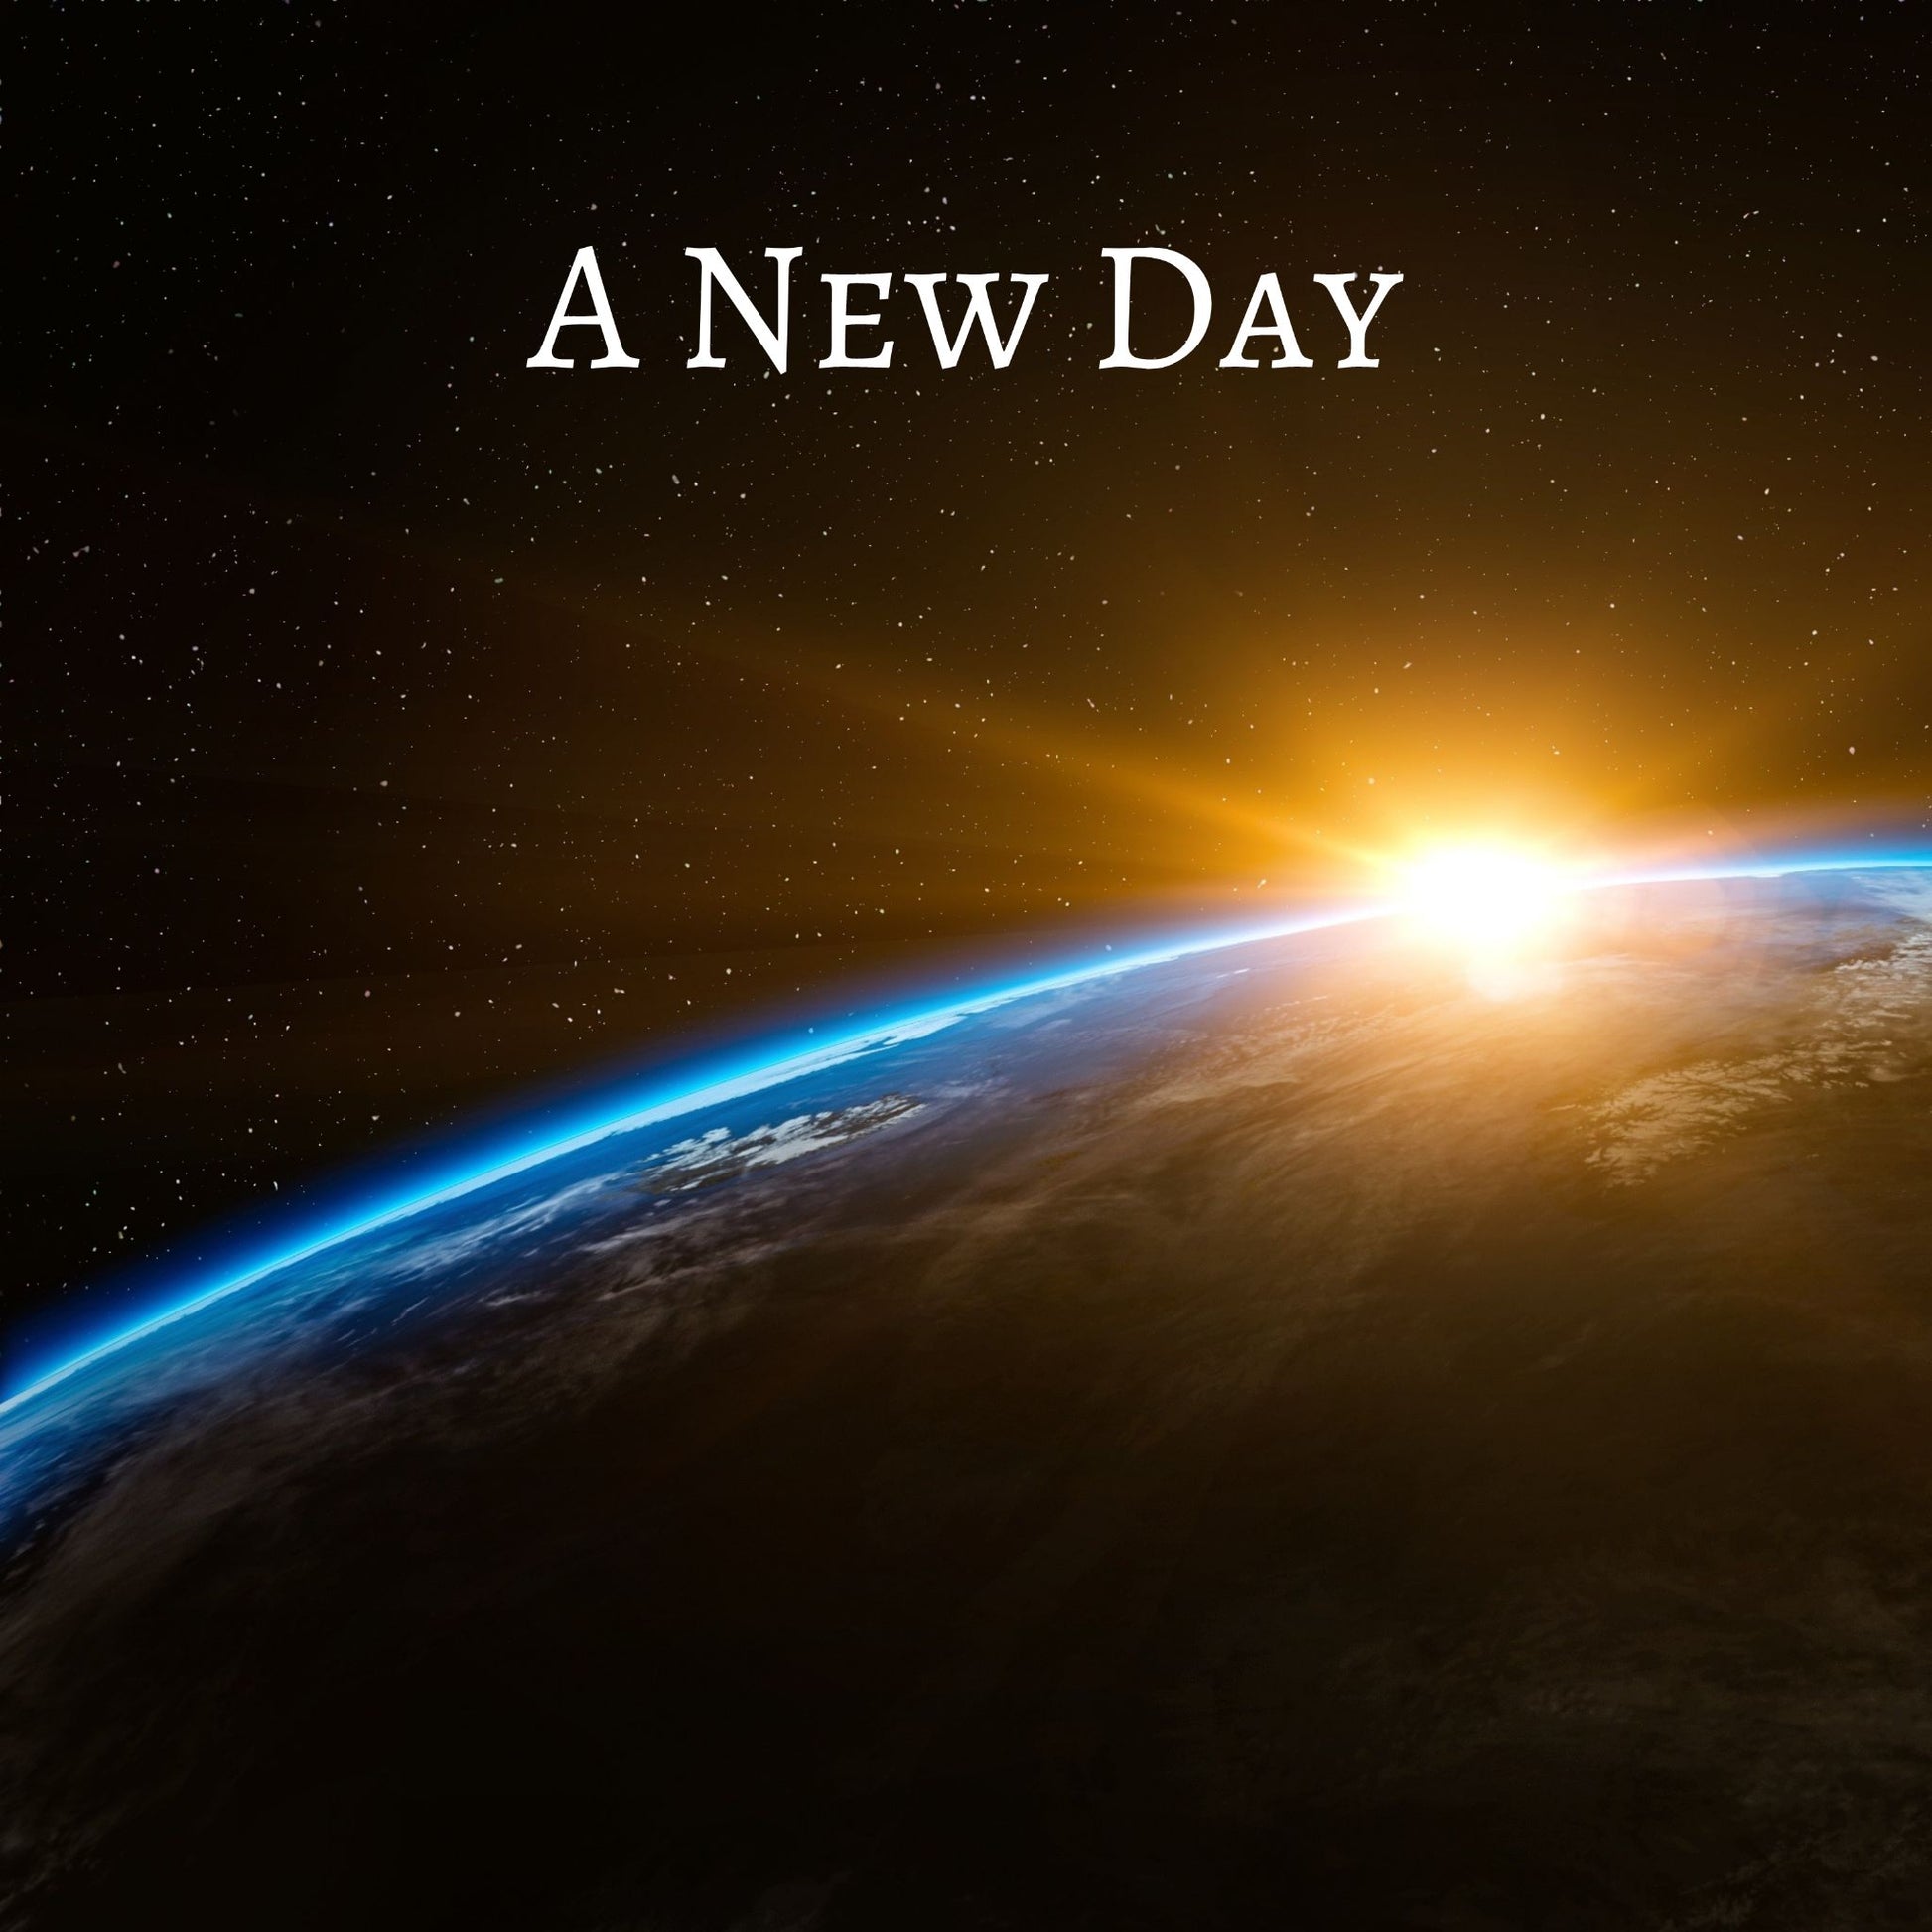 CD Cover of song A New Day